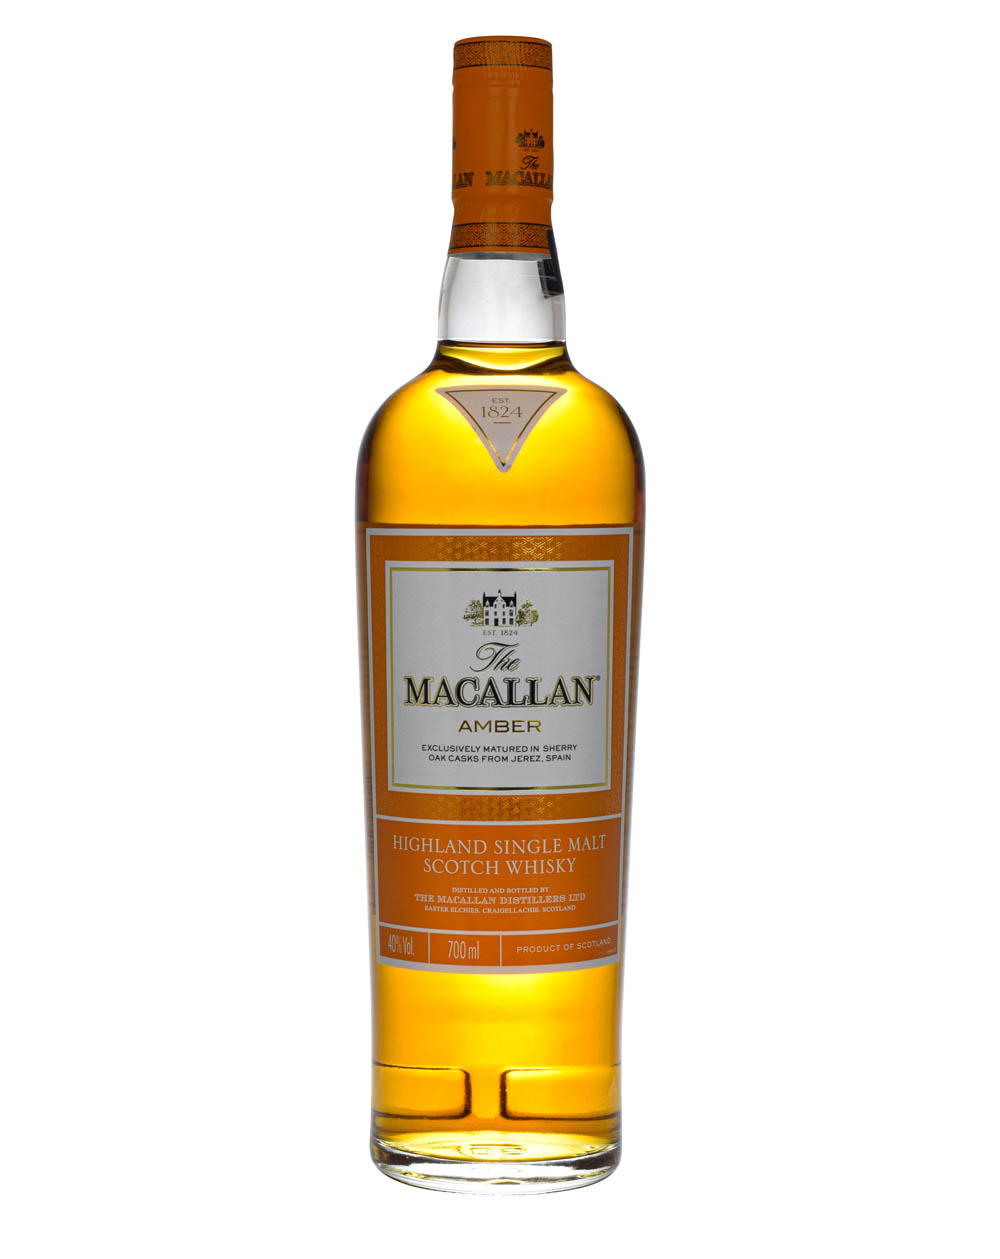 Macallan Amber Musthave Malts MHM